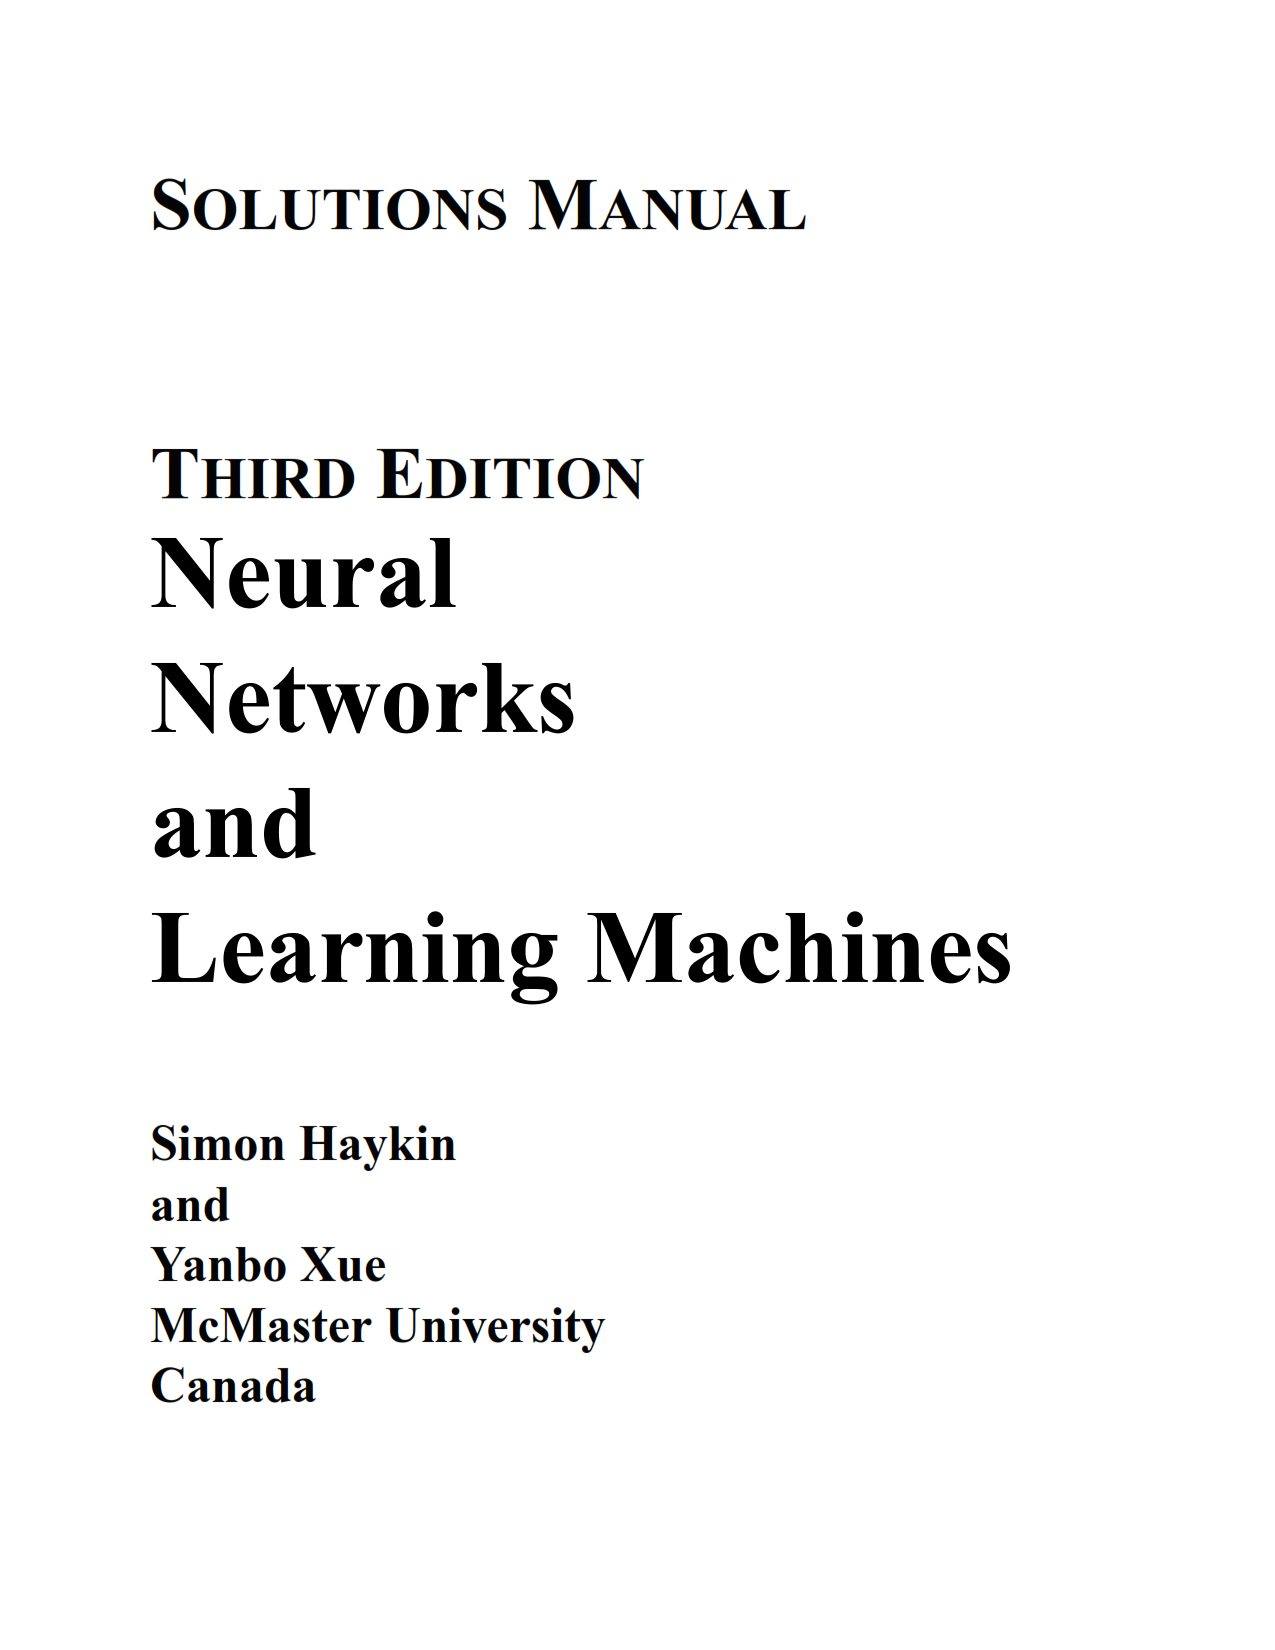 download free Neural Networks and Learning Machines 3rd edition Solution manual by Simon O. Haykin eBook pdf | gioumeh